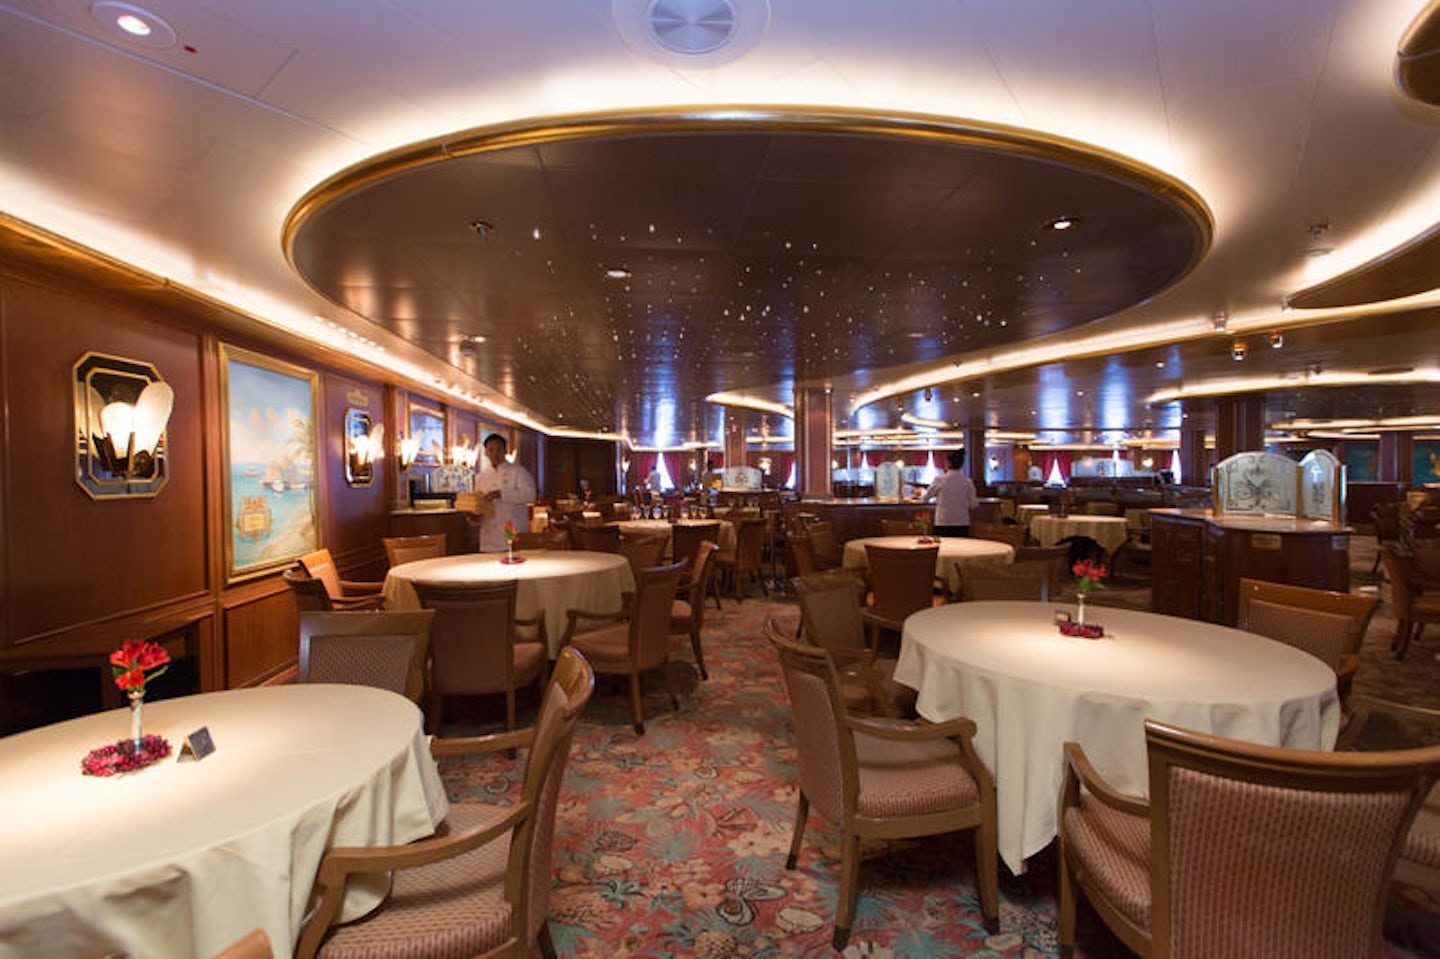 princess cruise dining migrated to ocean